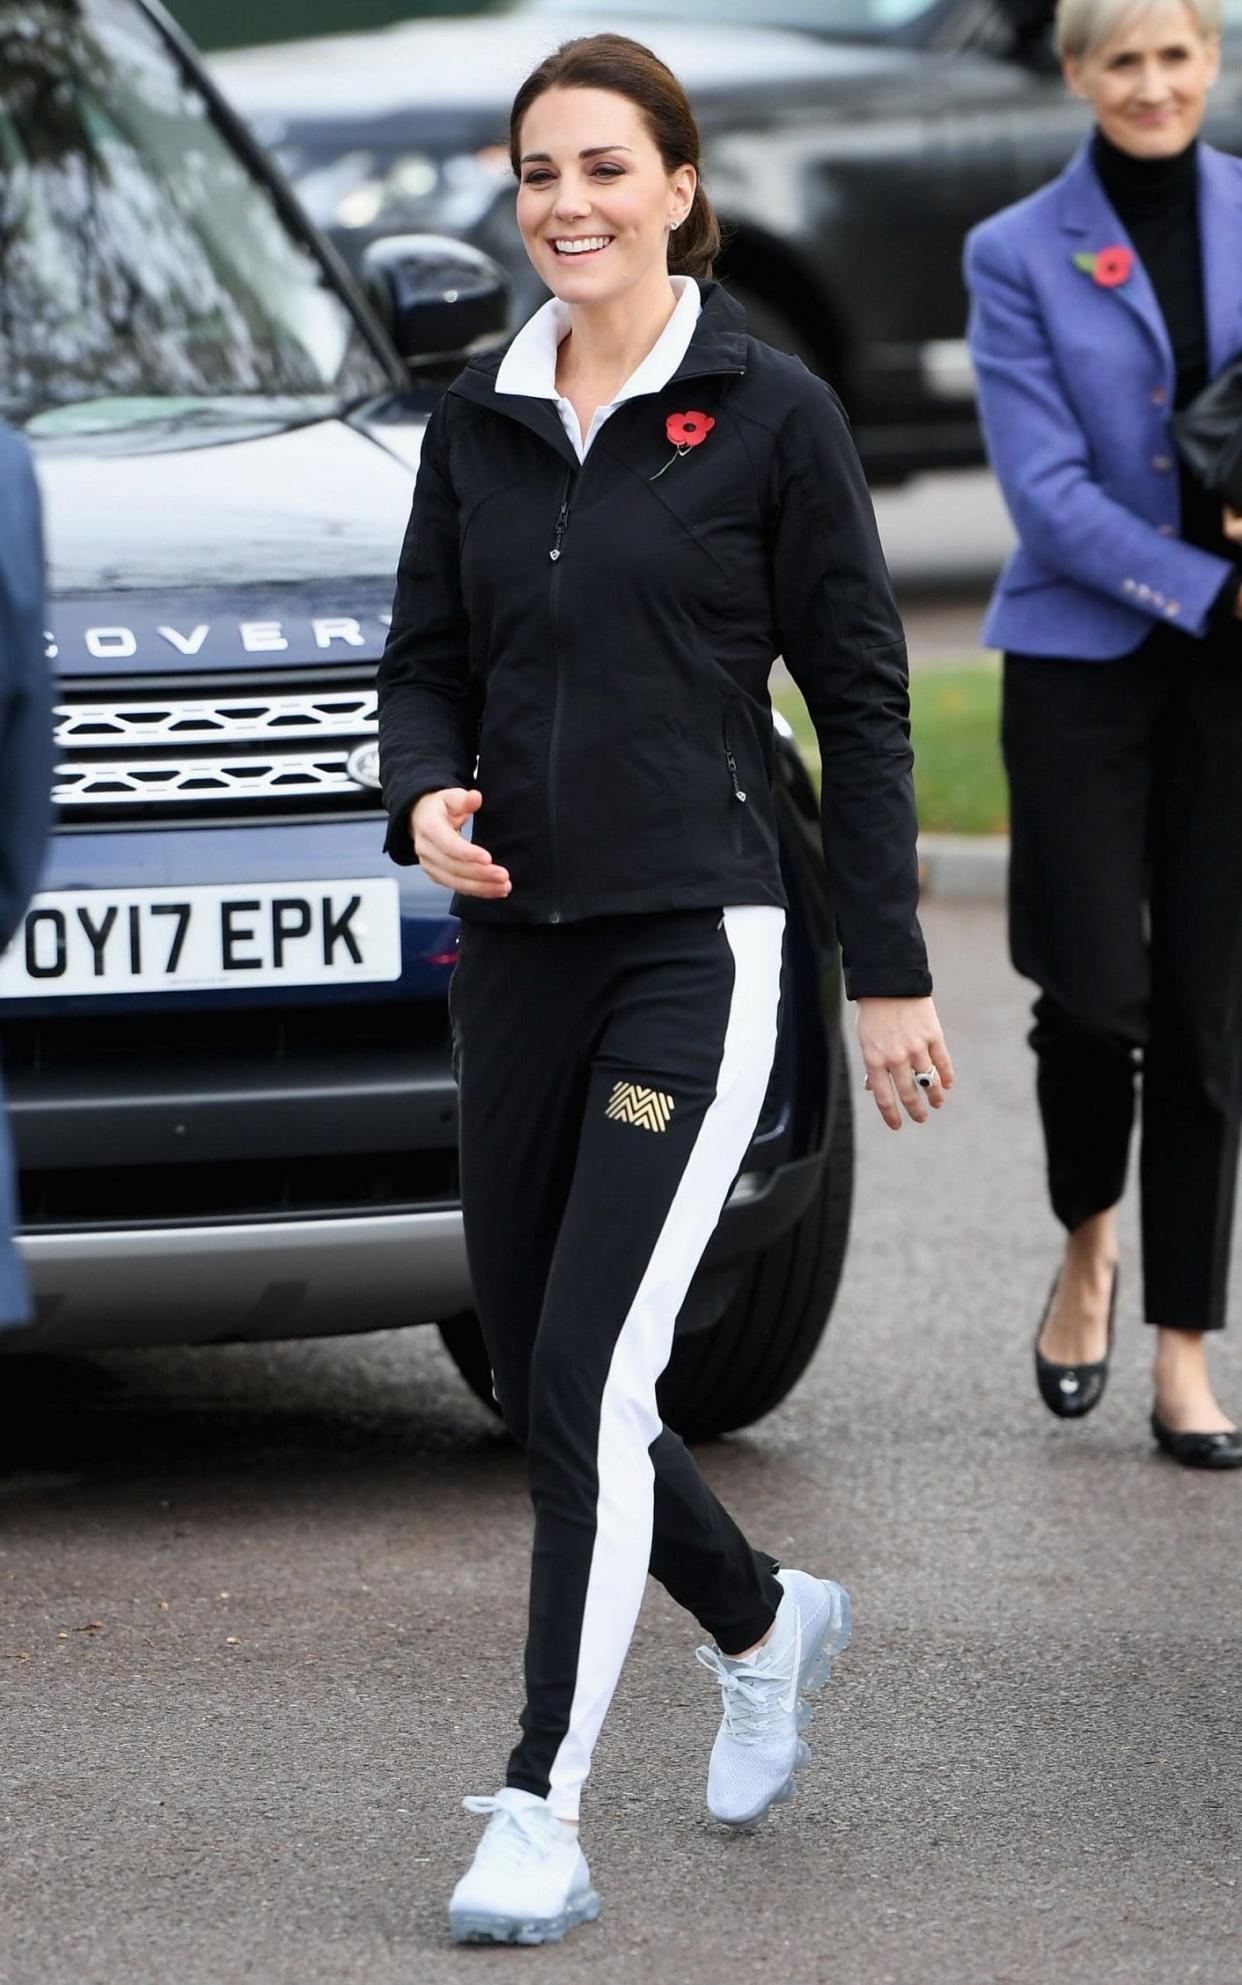 The Duchess of Cambridge visits the National Tennis Centre, wearing Monreal London leggings - WireImage